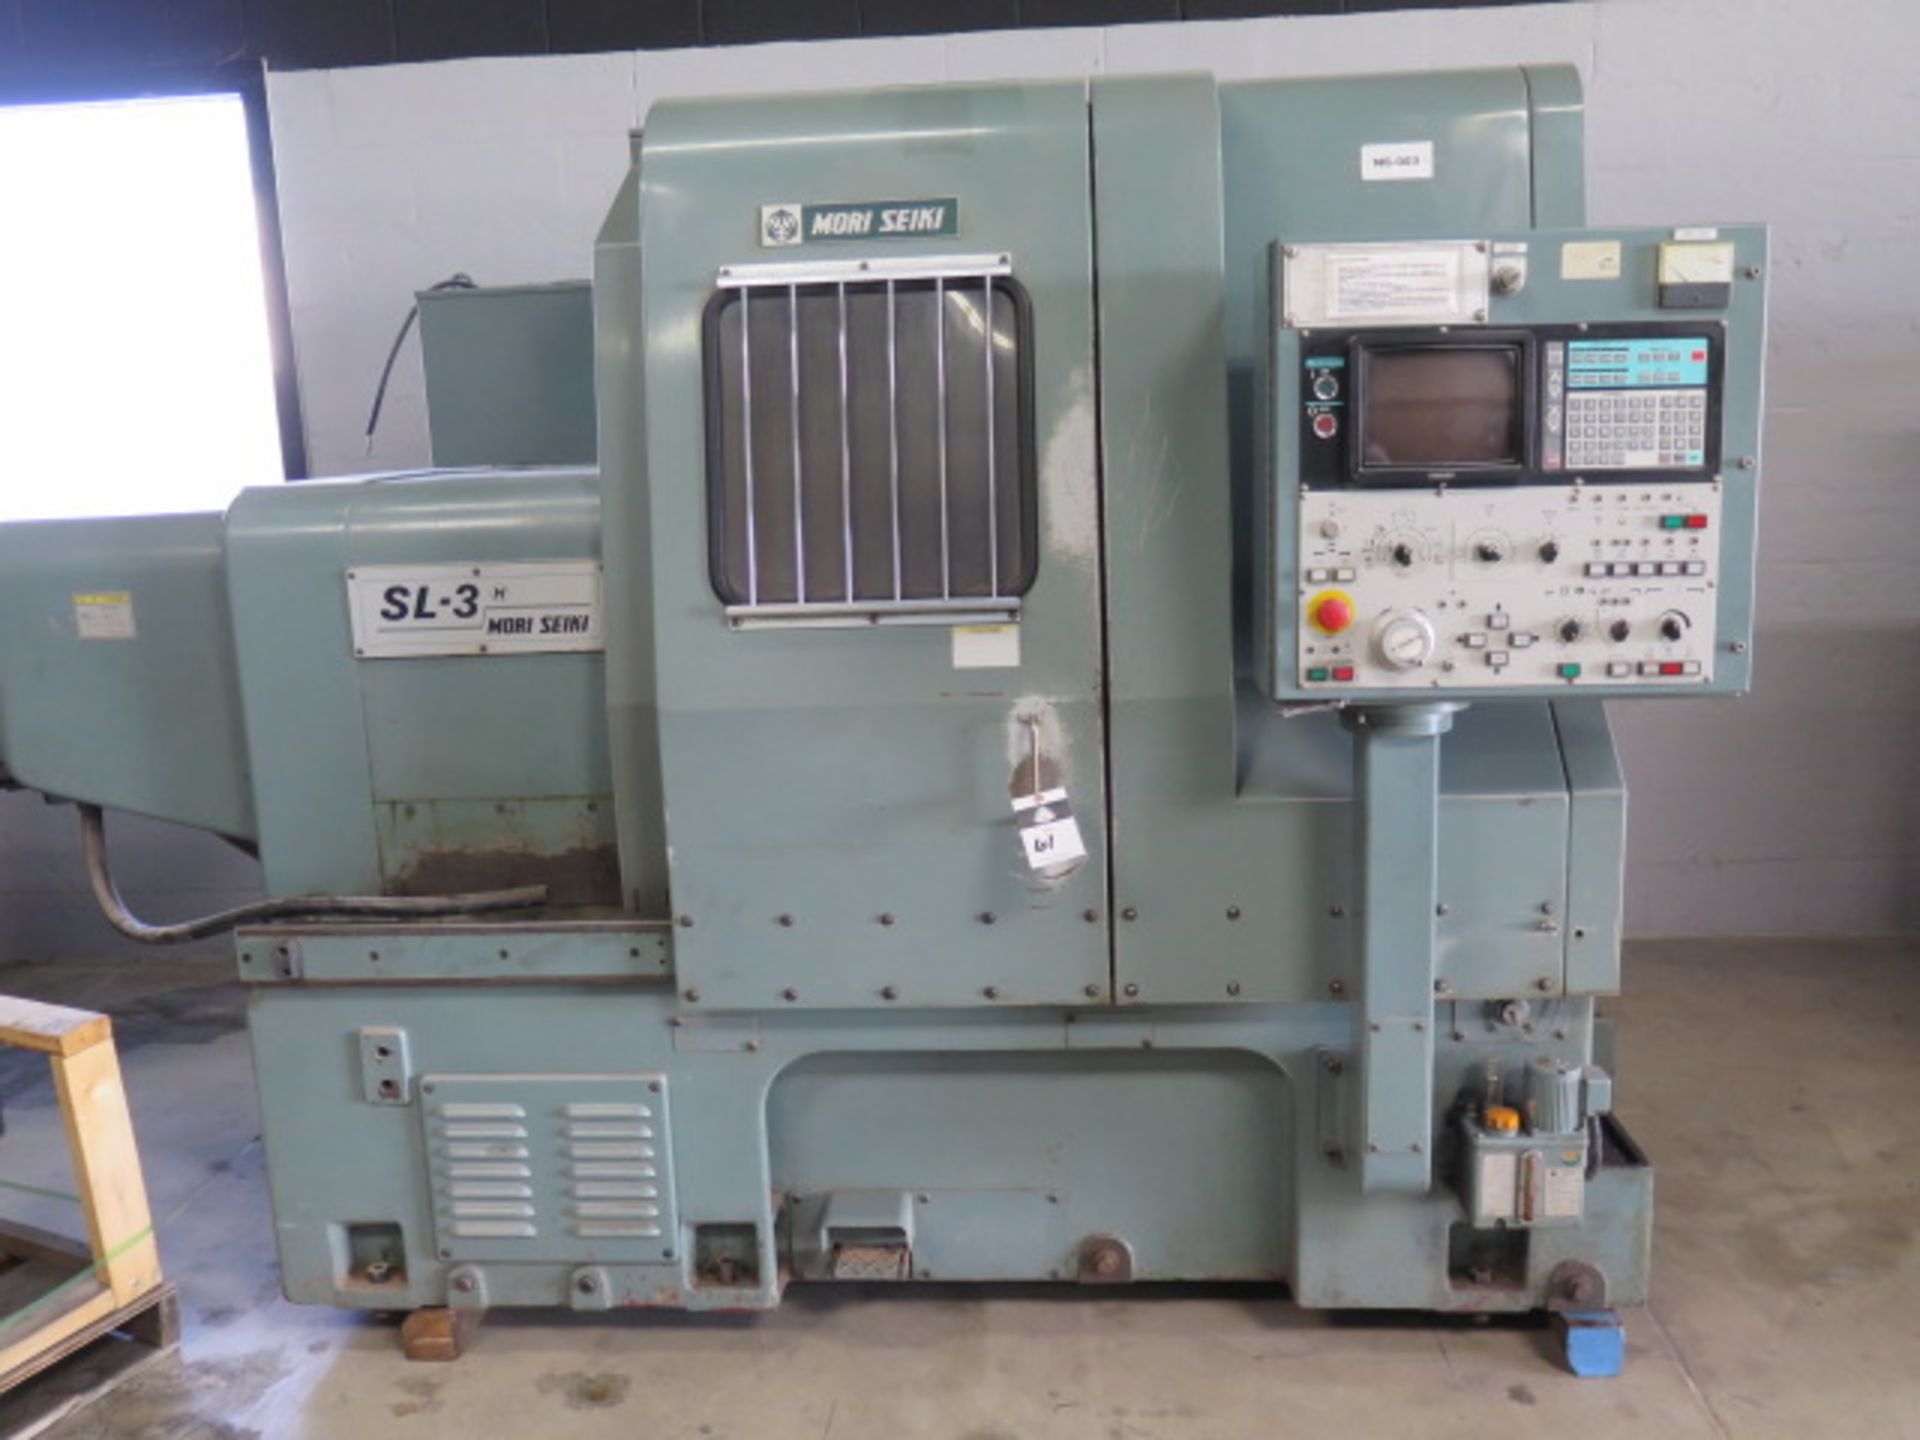 Mori Seiki SL-3H CNC Turning Center s/n 5331 w/ Yasnac Controls, 12-Station Turret, SOLD AS IS